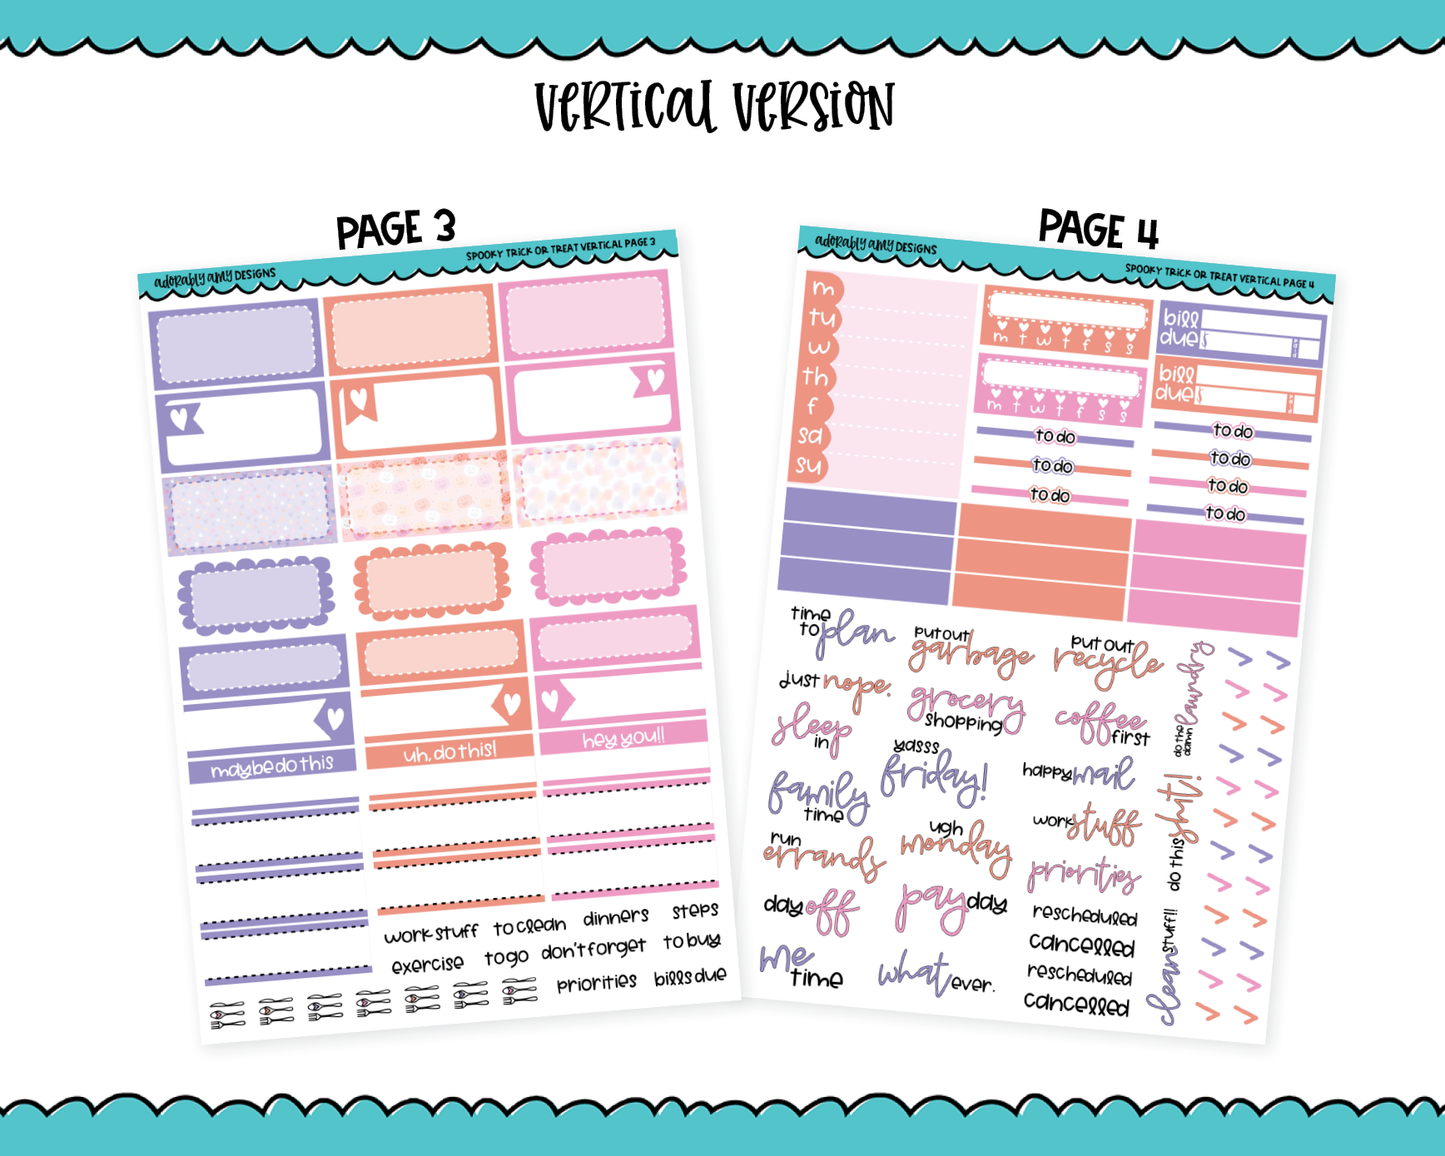 Vertical Spooky Trick or Treat Pastel Halloween Themed Planner Sticker Kit for Vertical Standard Size Planners or Inserts